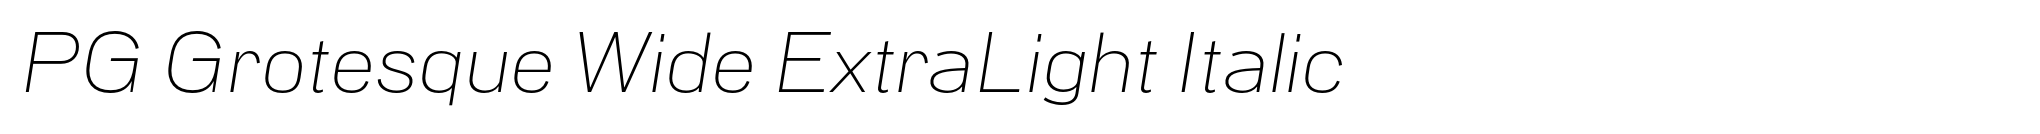 PG Grotesque Wide ExtraLight Italic image